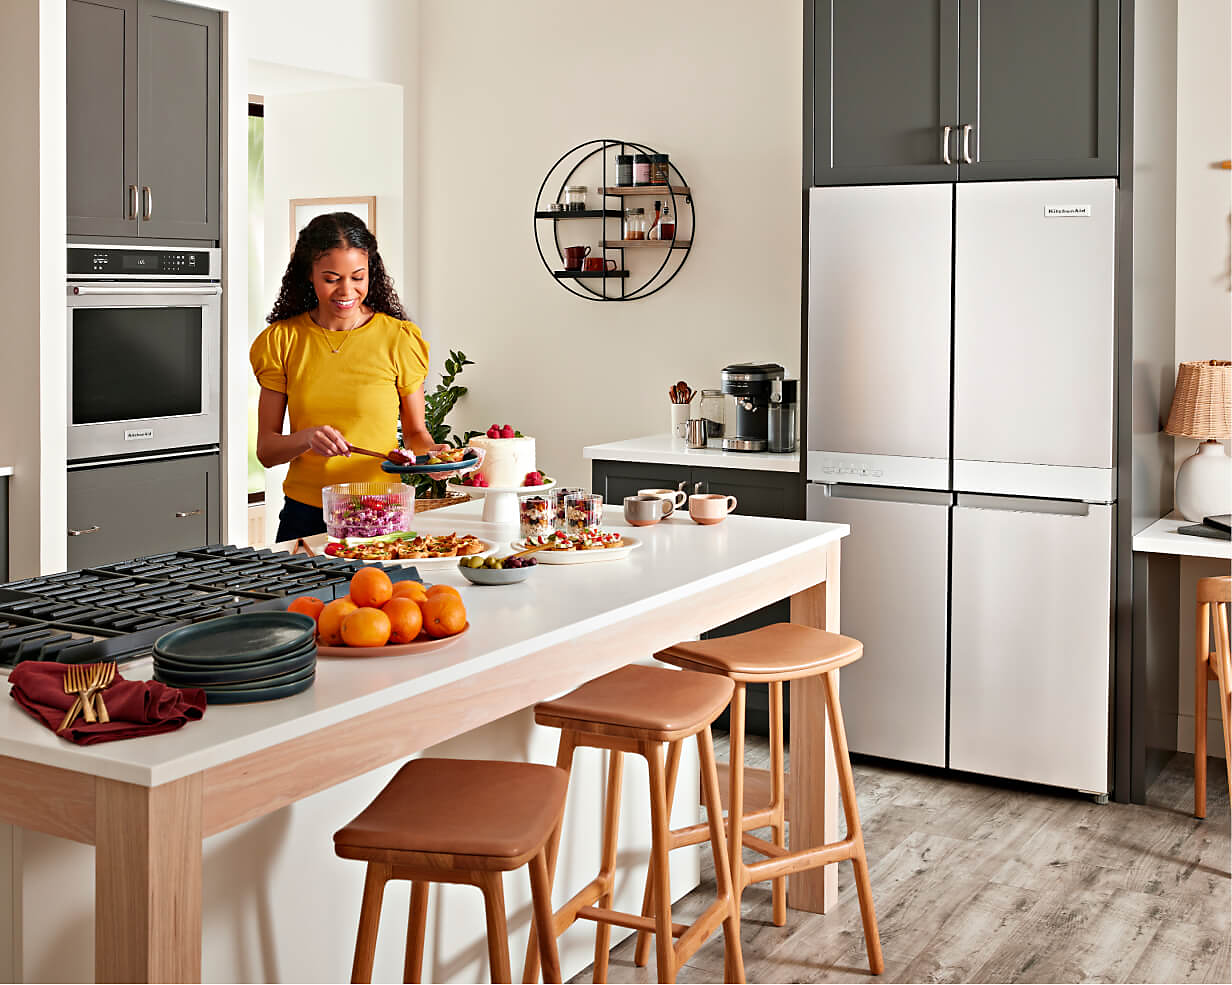 A KitchenAid® four-door freestanding refrigerator in a stylish kitchen filled with a suite of KitchenAid® appliances and a person preparing food for a gathering.